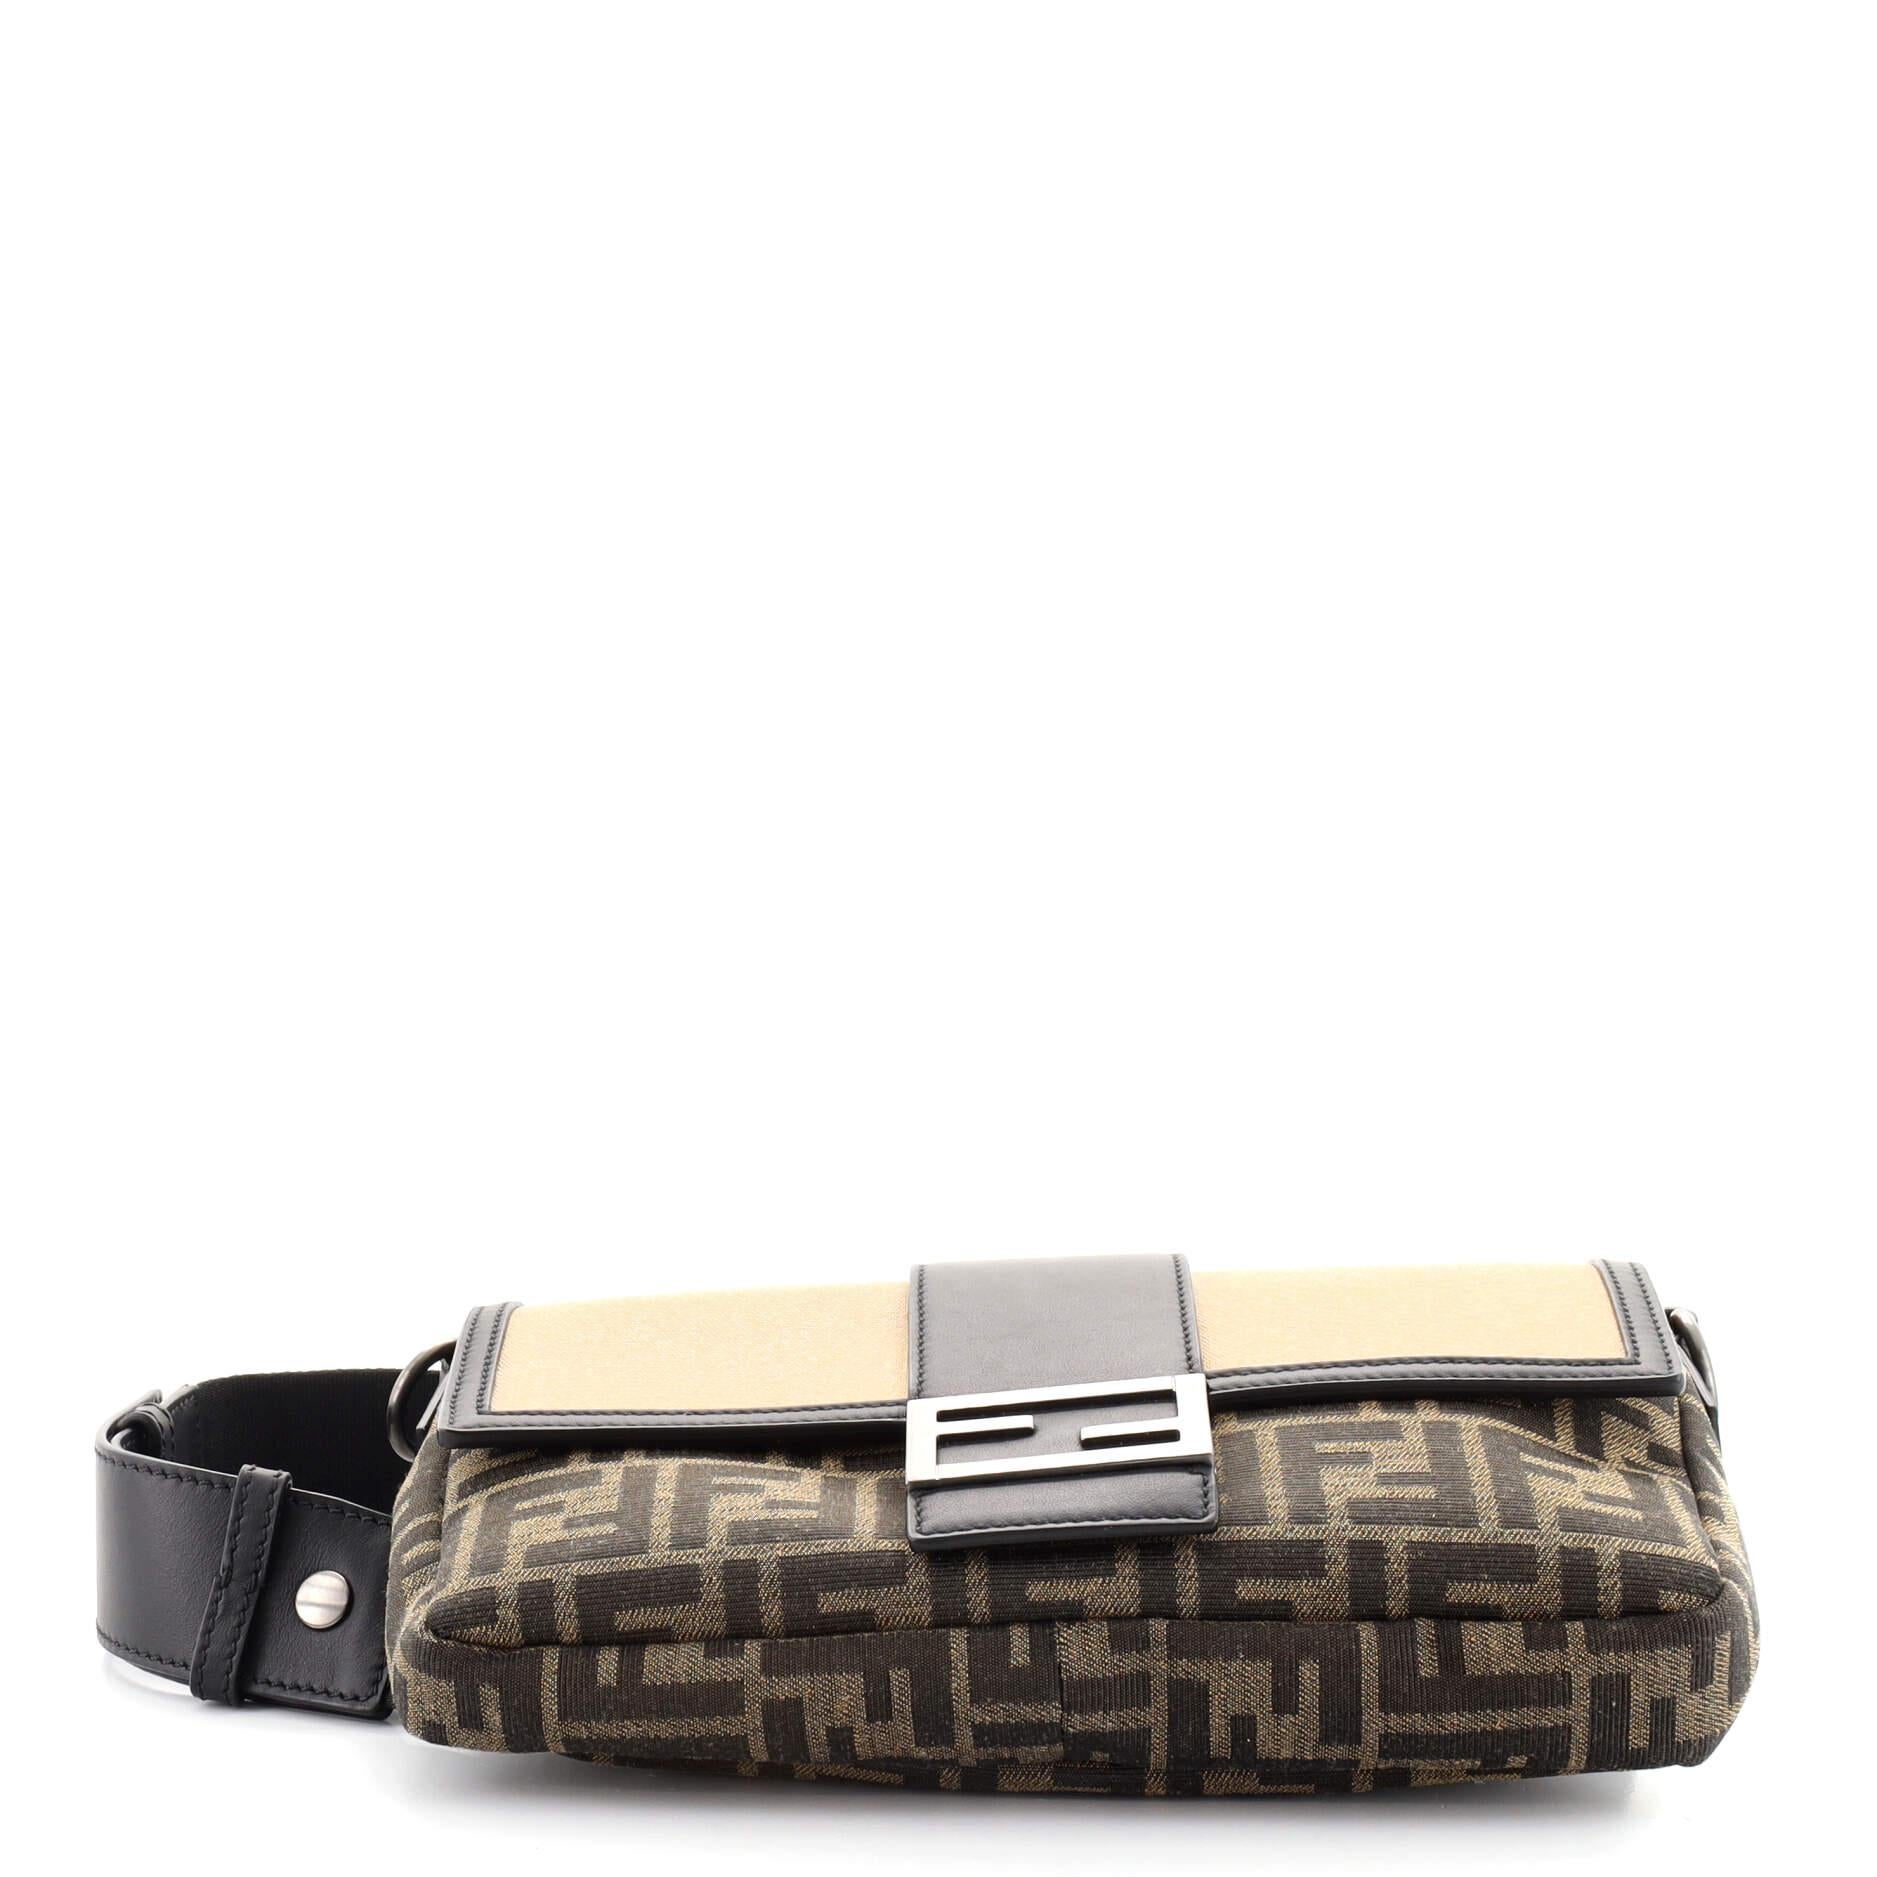 Black Fendi Baguette Convertible Belt Bag Zucca Canvas with Canvas and Leather Medium